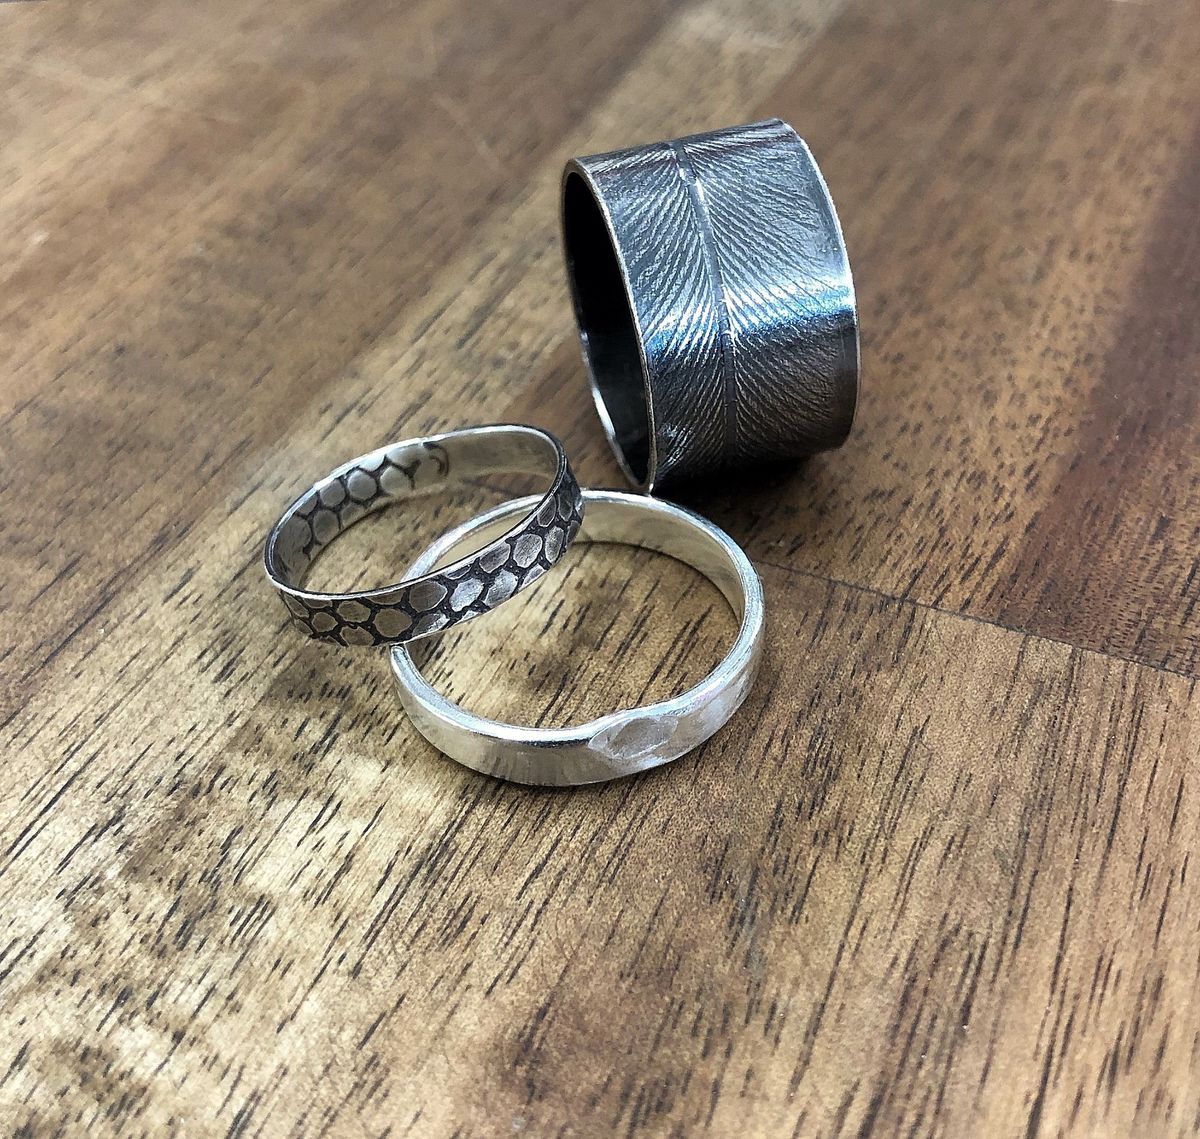 Silver Ring Day - July